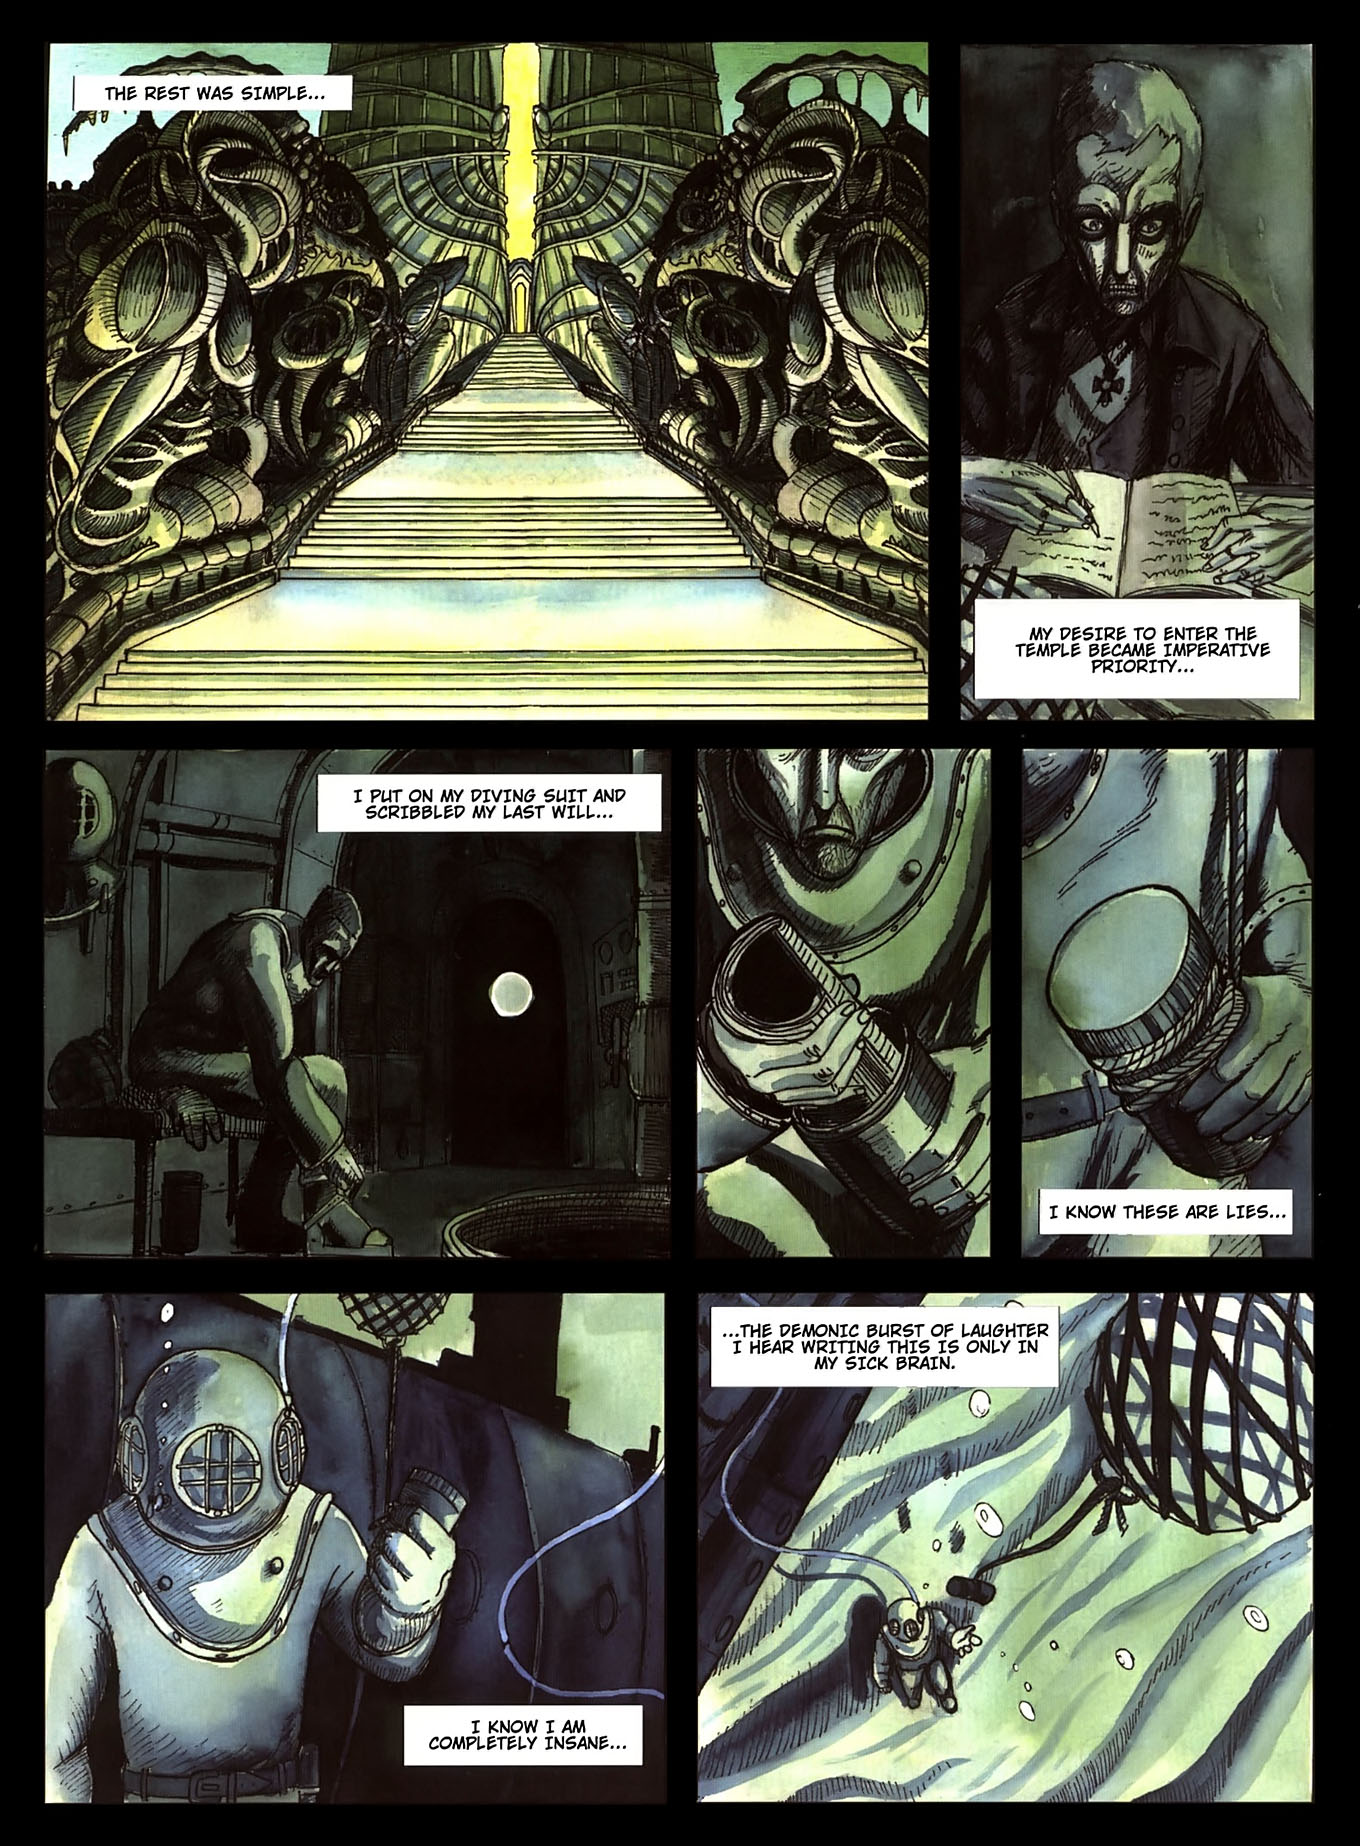 Read online H.P. Lovecraft - The Temple comic -  Issue # Full - 74